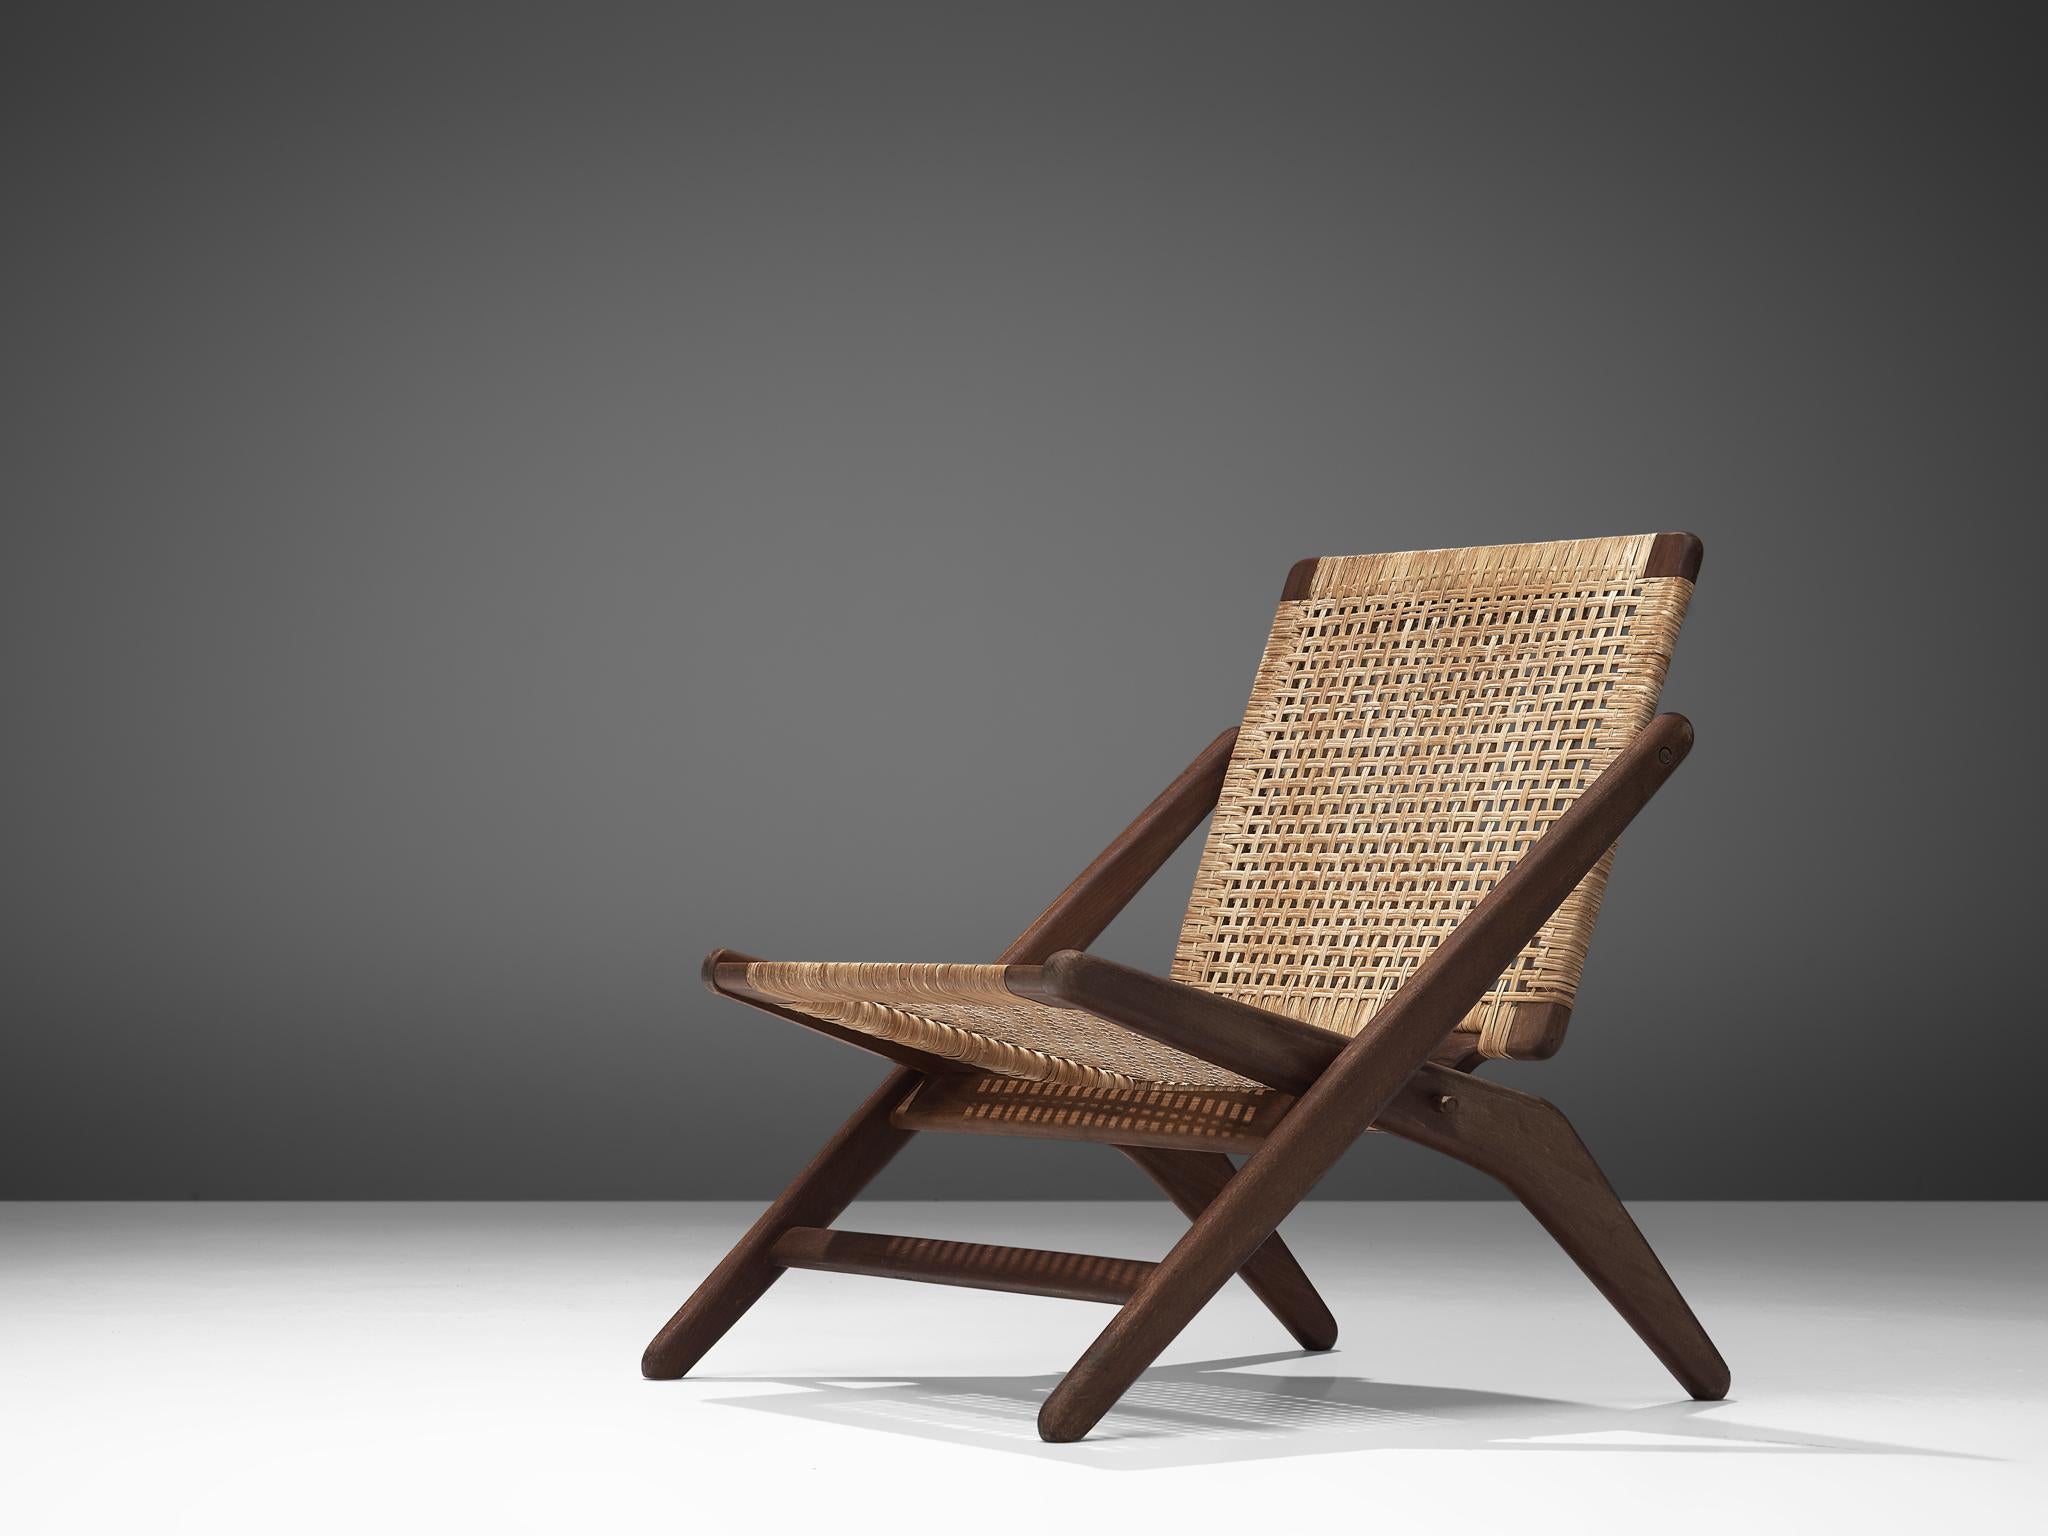 Arne Hovmand-Olsen, easy chair, beech and cane, Denmark, 1960s.

 
This Minimalist, Scandinavian Modern lounge chair features a scissor-like solid beechwood frame with woven cane seat. This folding chair is equipped with an inventive folding